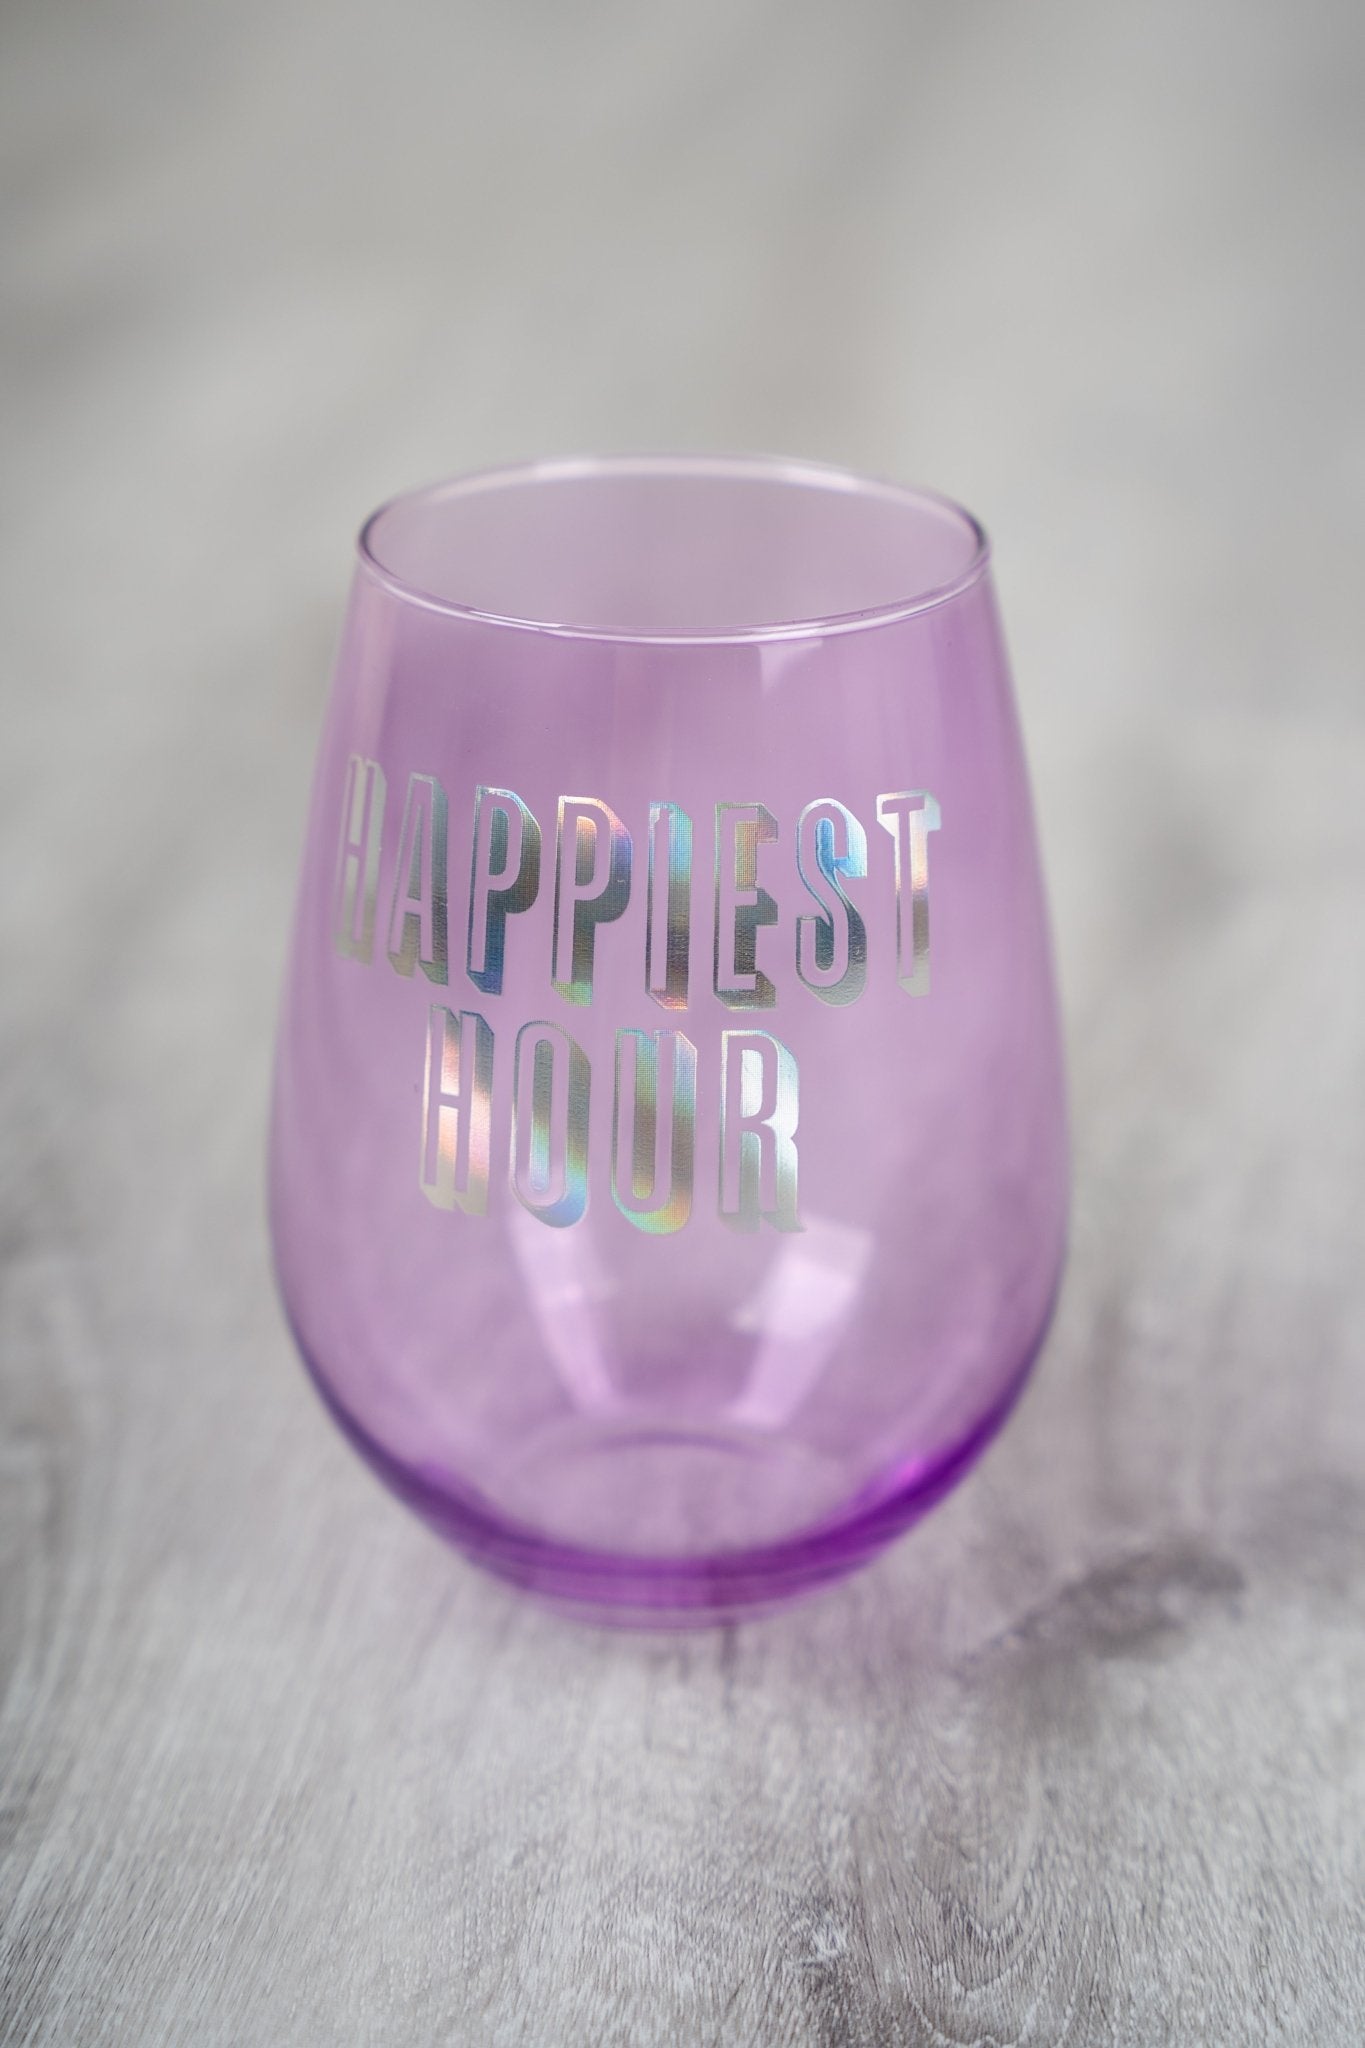 Happiest Hour jumbo wine glass - Trendy Tumblers, Mugs and Cups at Lush Fashion Lounge Boutique in Oklahoma City